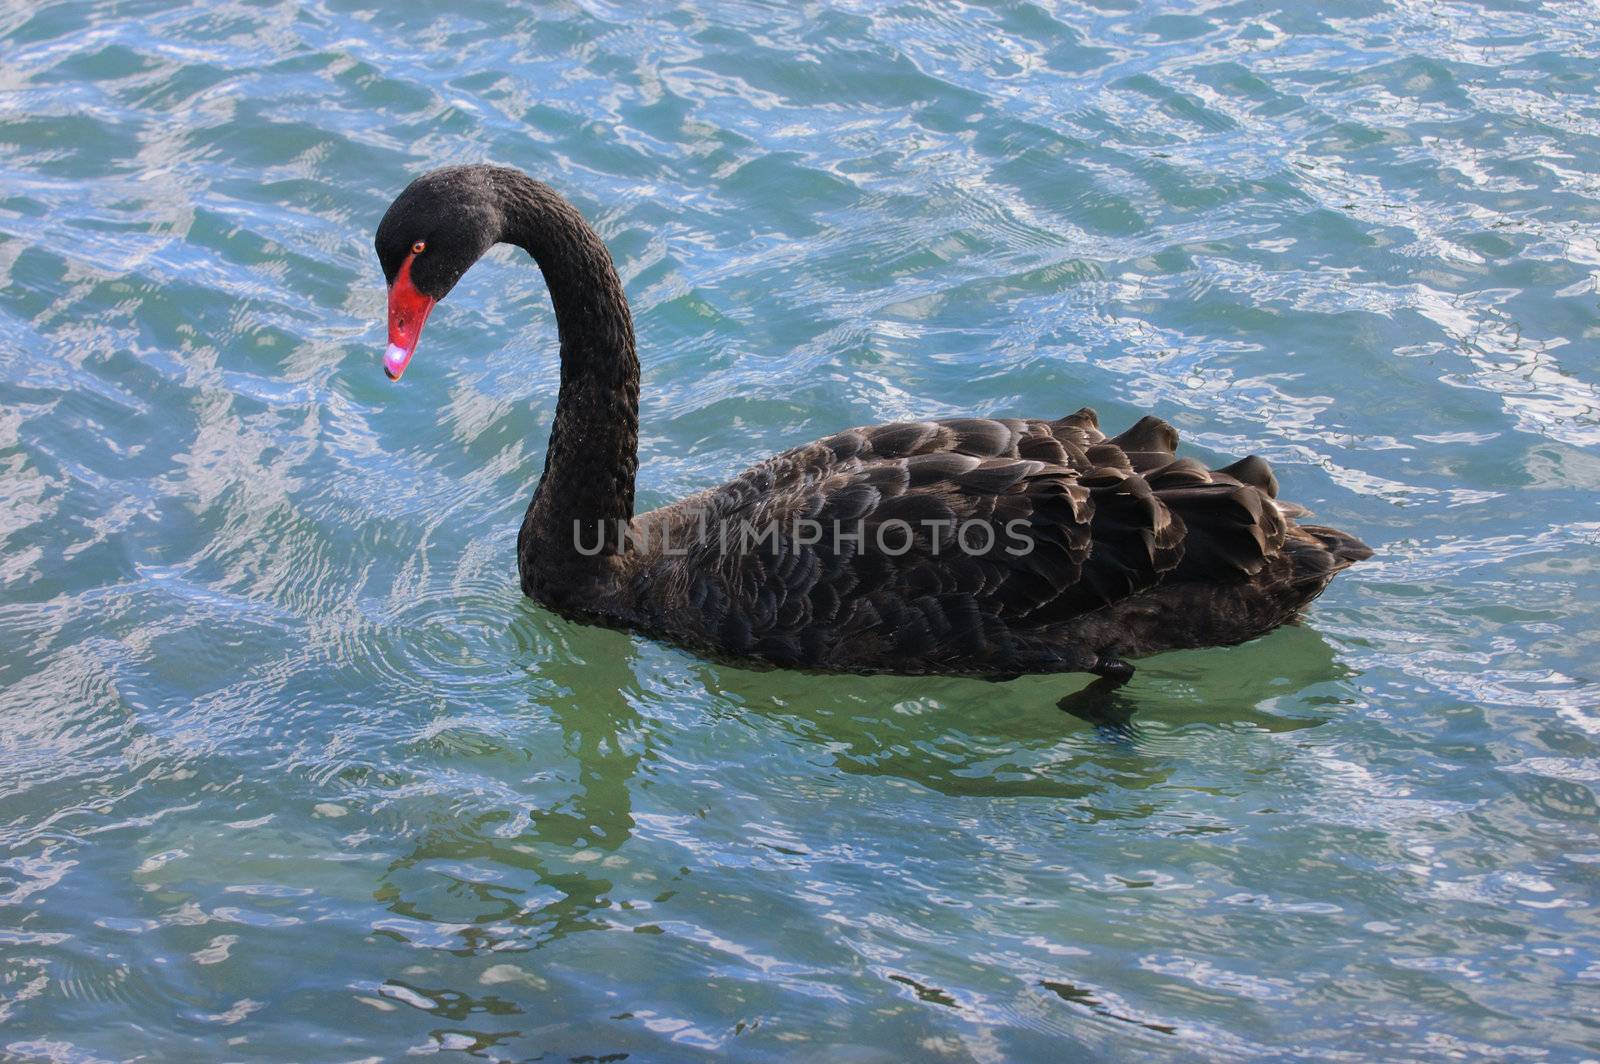 Closeup of Black Swan, a bird species native to Autralia and New Zealand